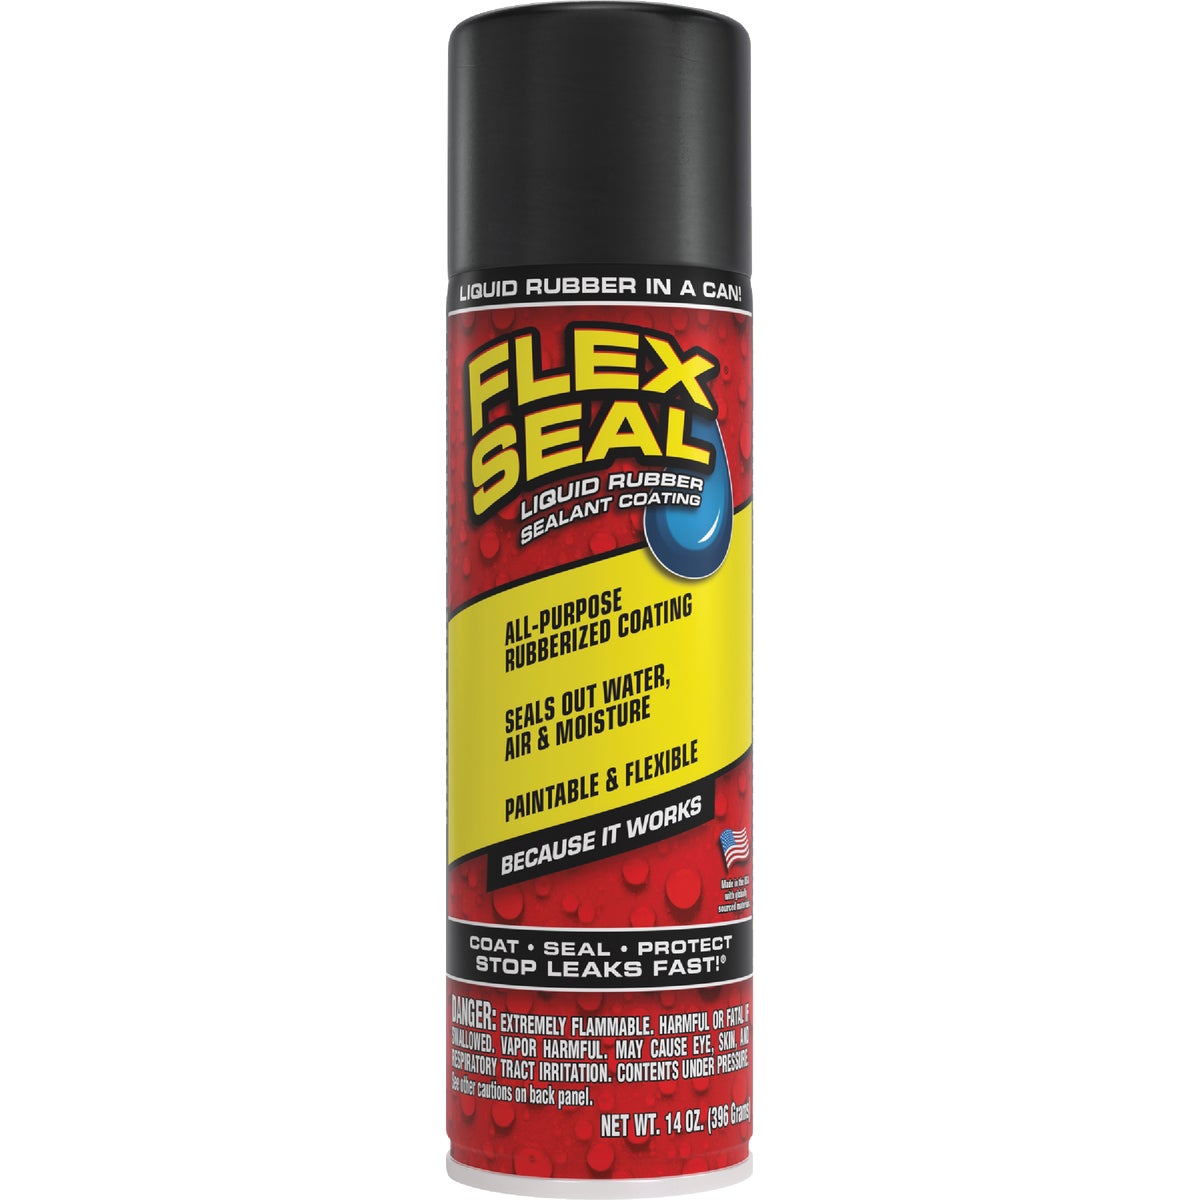 Item 770560, Easy to use aerosol spray shoots a thick liquid that seeps into cracks and 